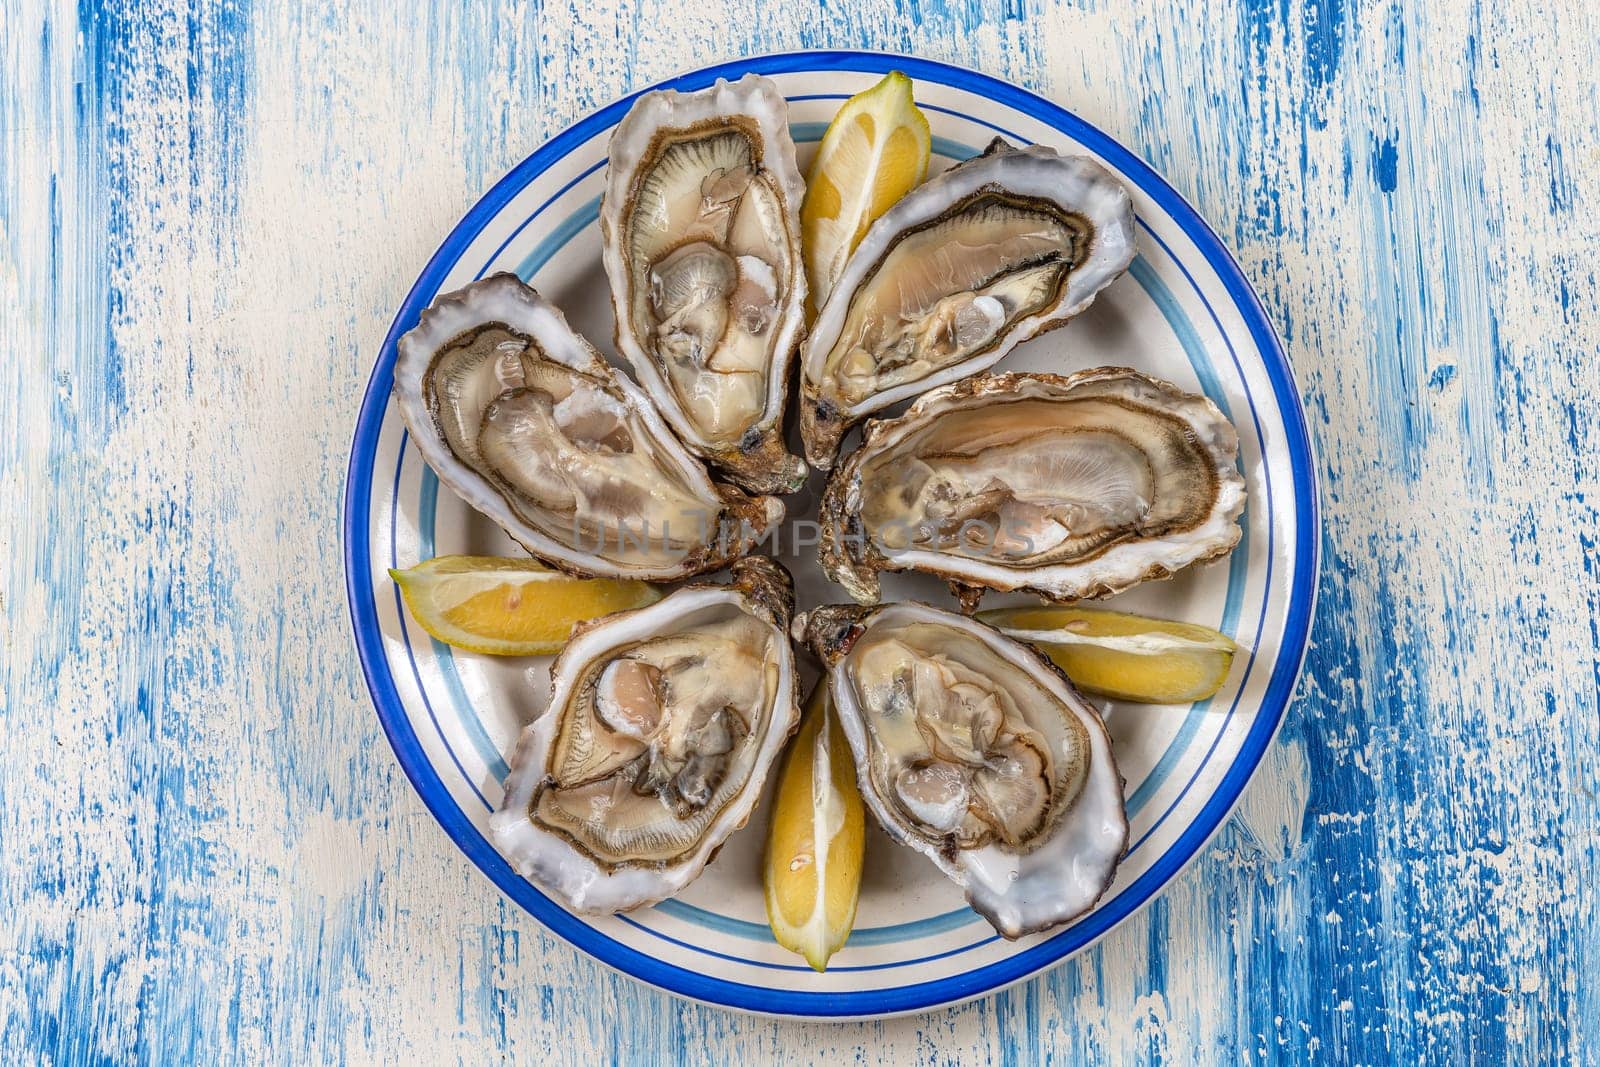 oysters fresh plate healthy meal fon the table copy space food background rustic top view